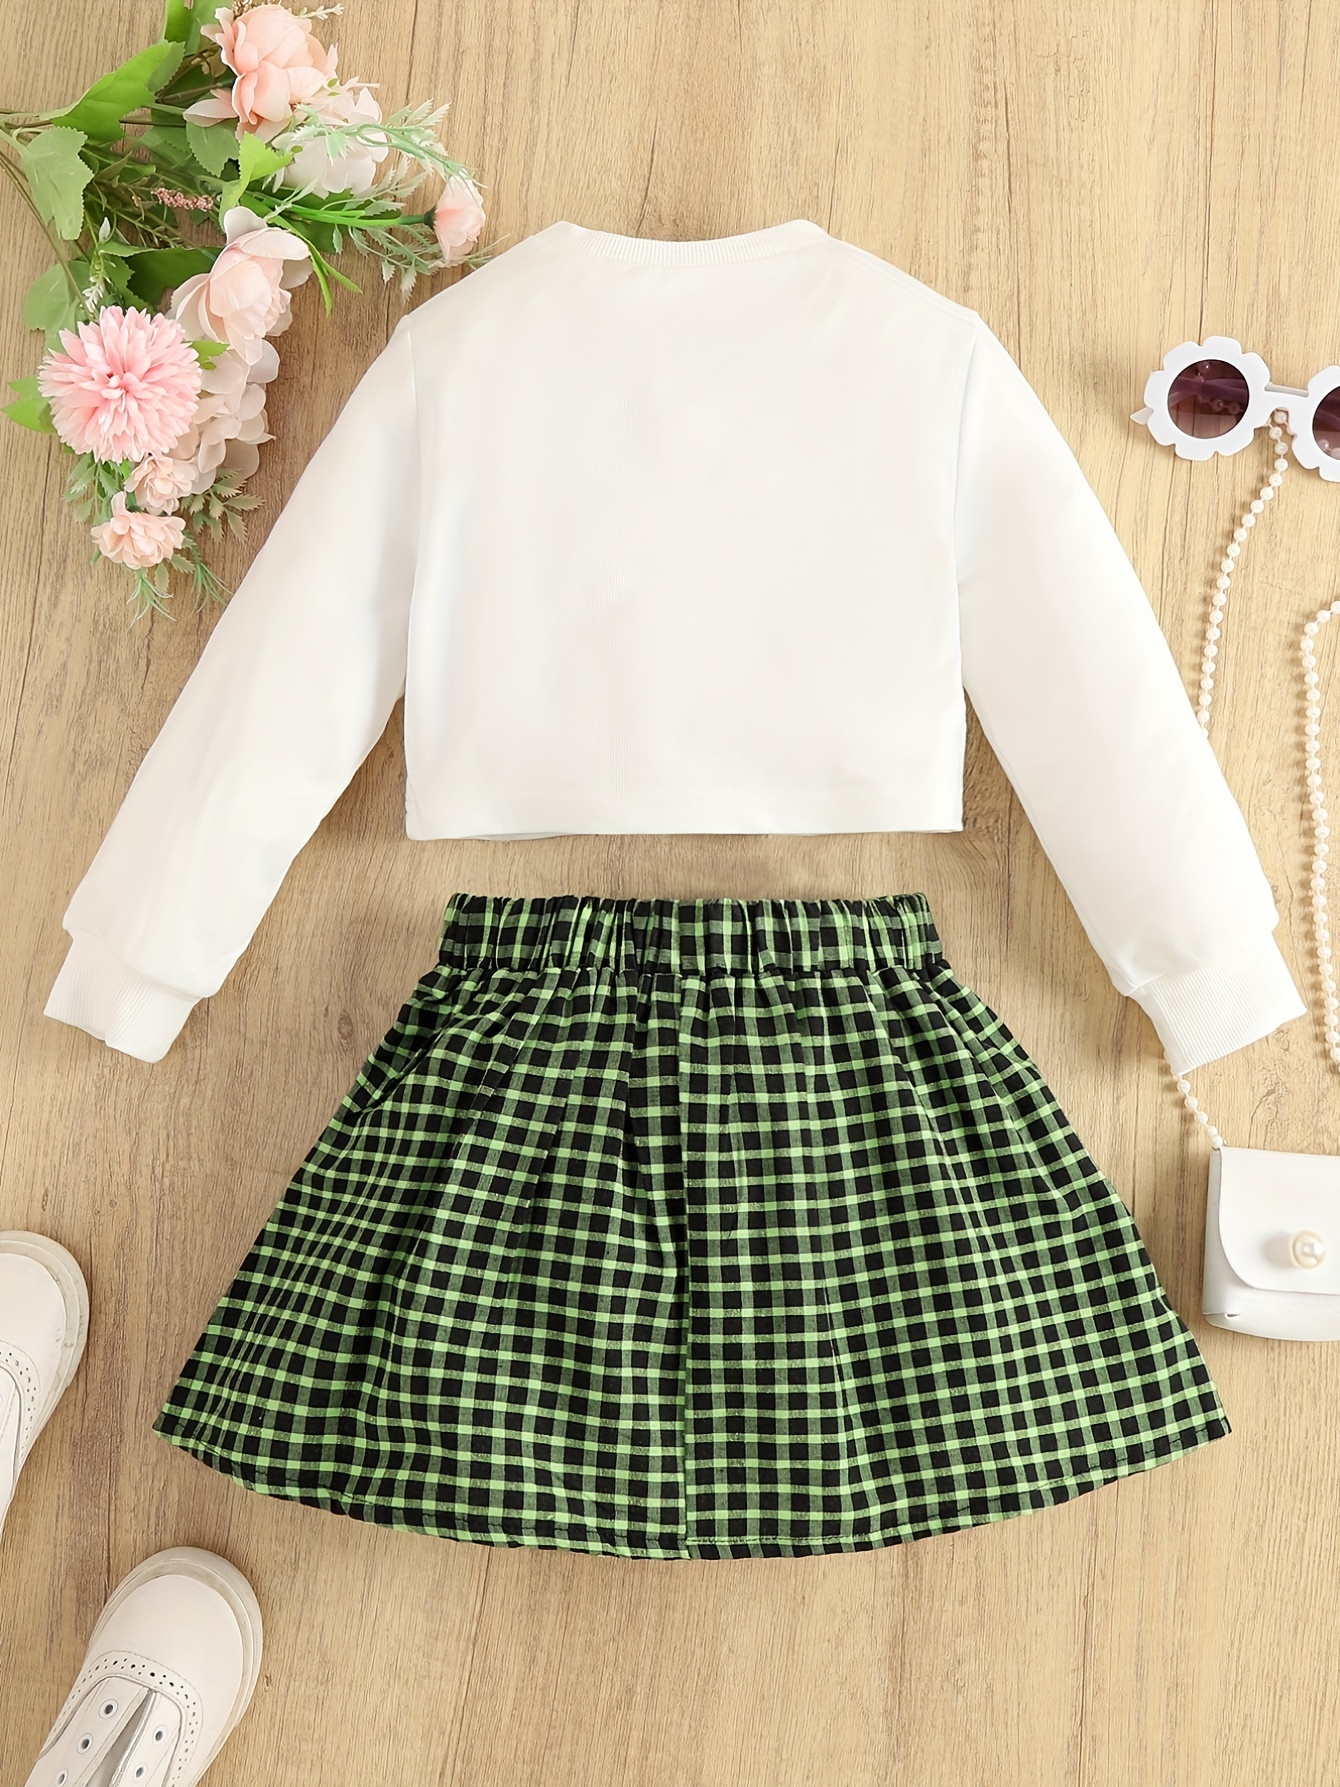 Preppy Outfits For Kids